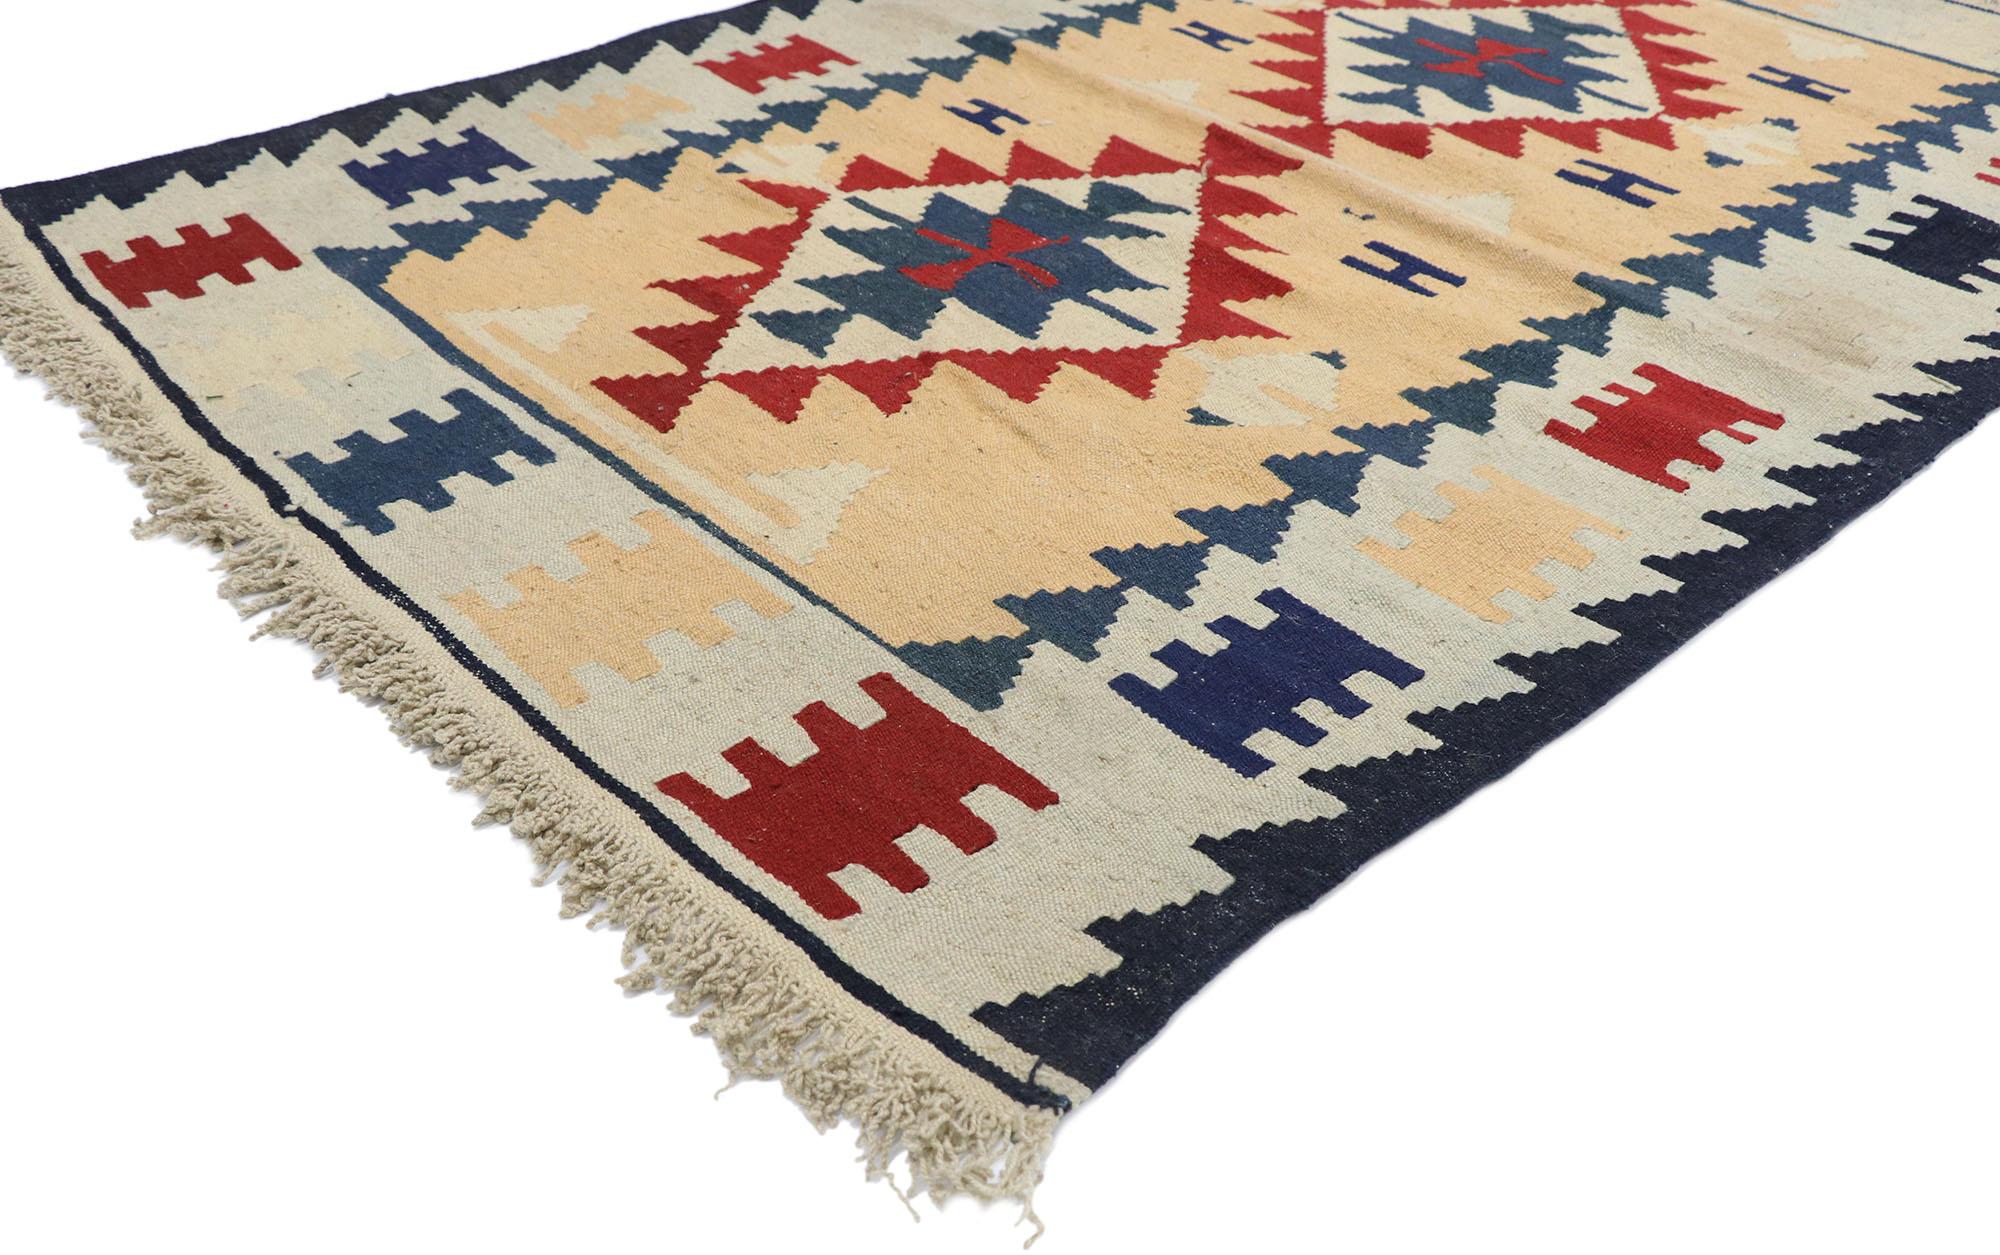 77826 vintage Persian Shiraz Kilim rug with Tribal style 03'09 x 05'05. Full of tiny details and a bold expressive design combined with vibrant colors and tribal style, this hand-woven wool vintage Persian Shiraz kilim rug is a captivating vision of